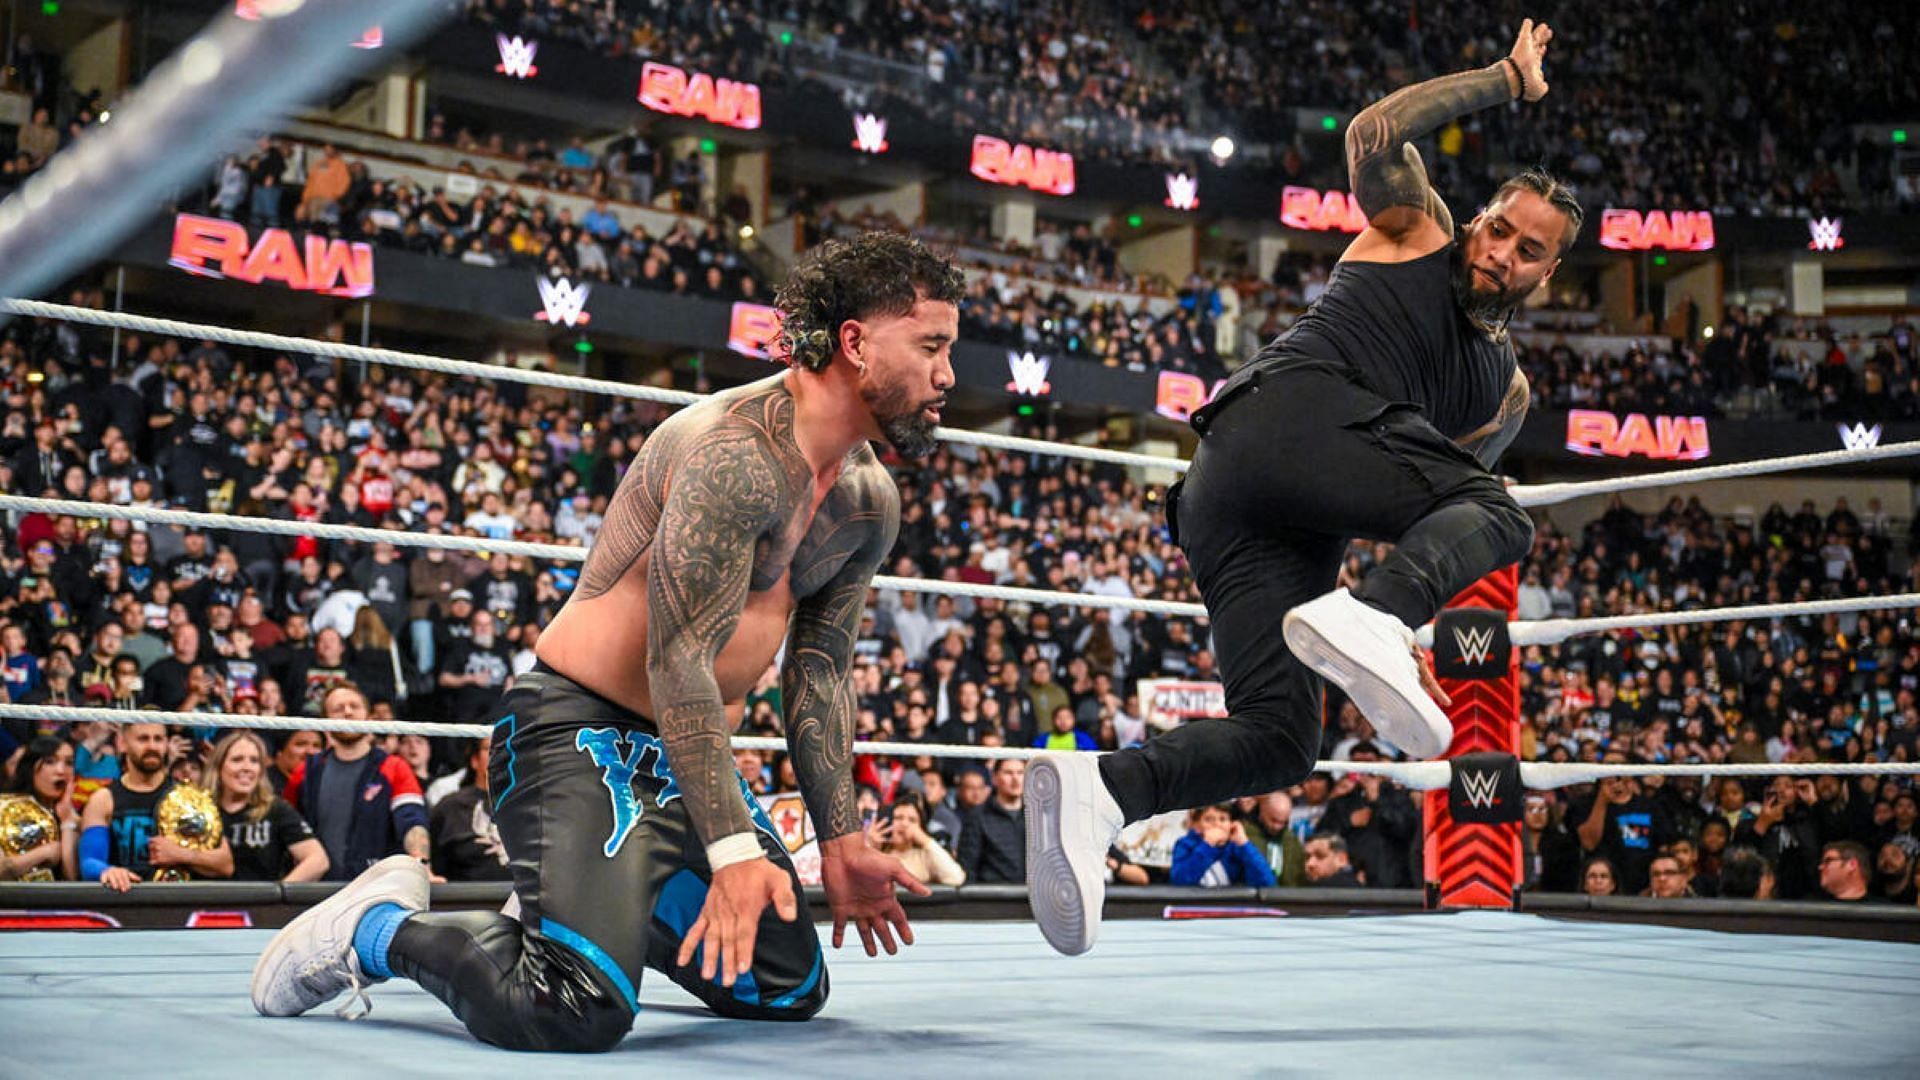 Jimmy Uso won&#039;t allow his twin Jey to have any success without him.